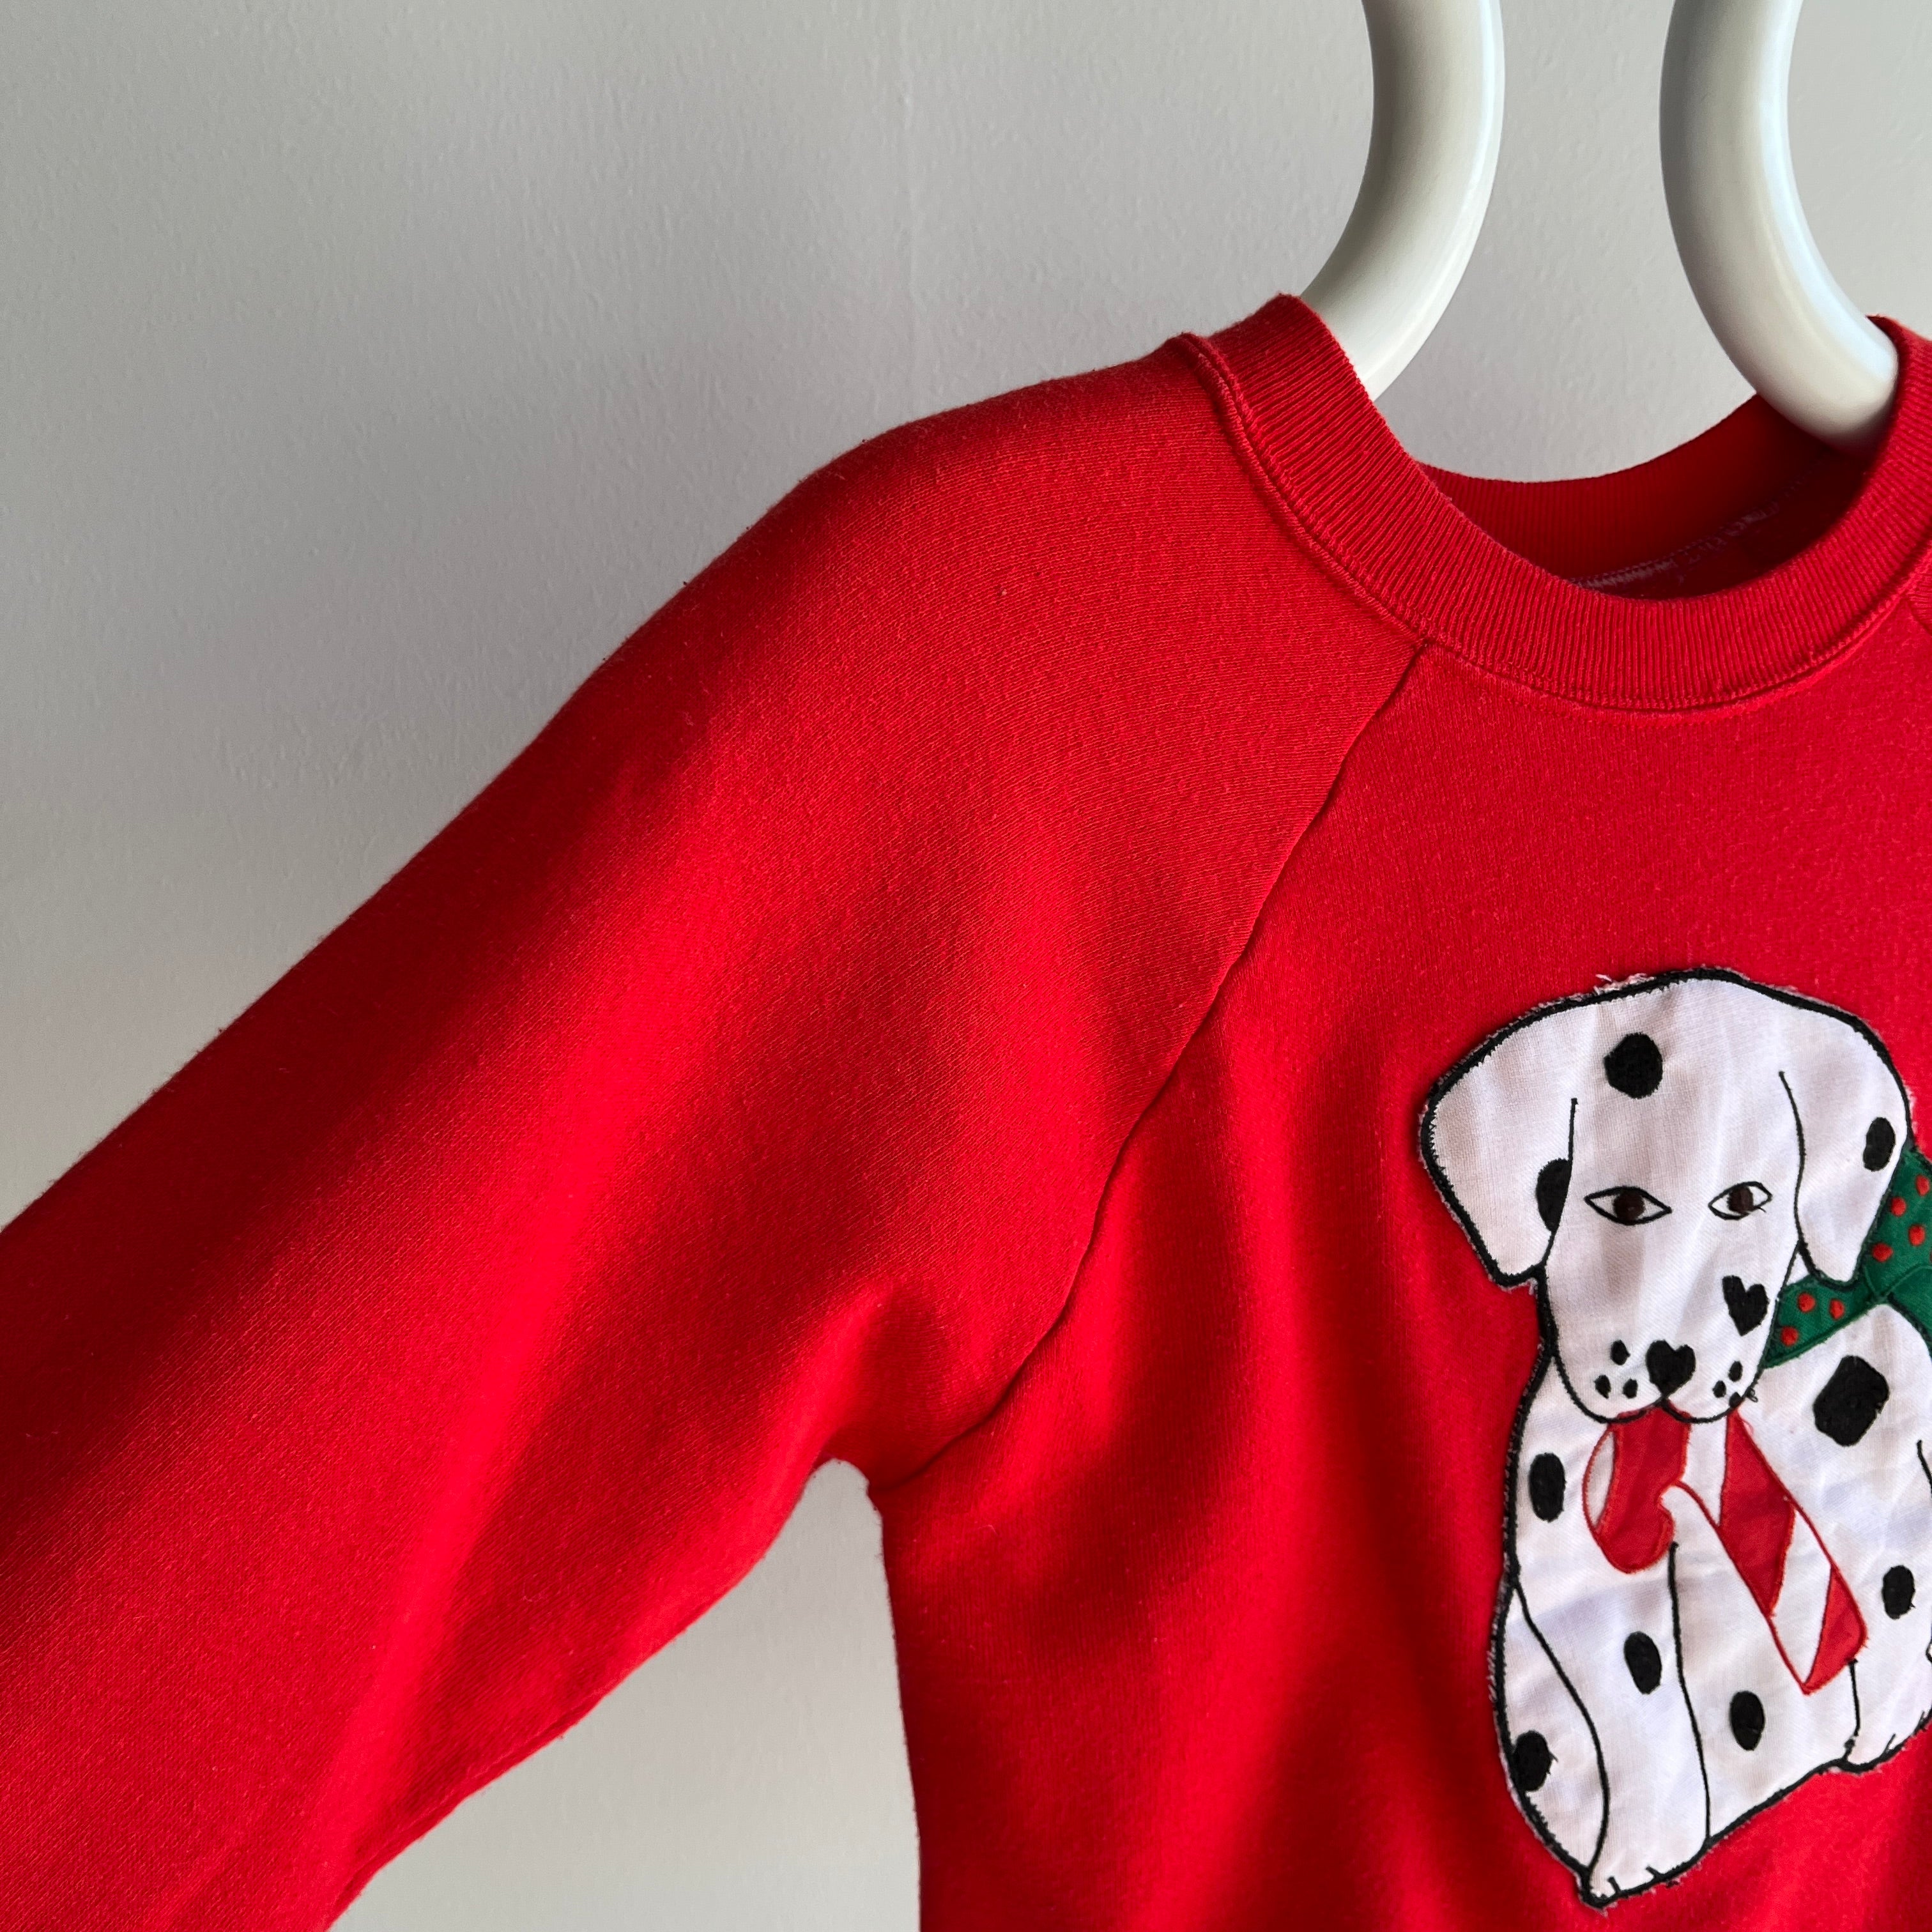 1980s Dalmatian Puppy and a Candy Cane Sweatshirt